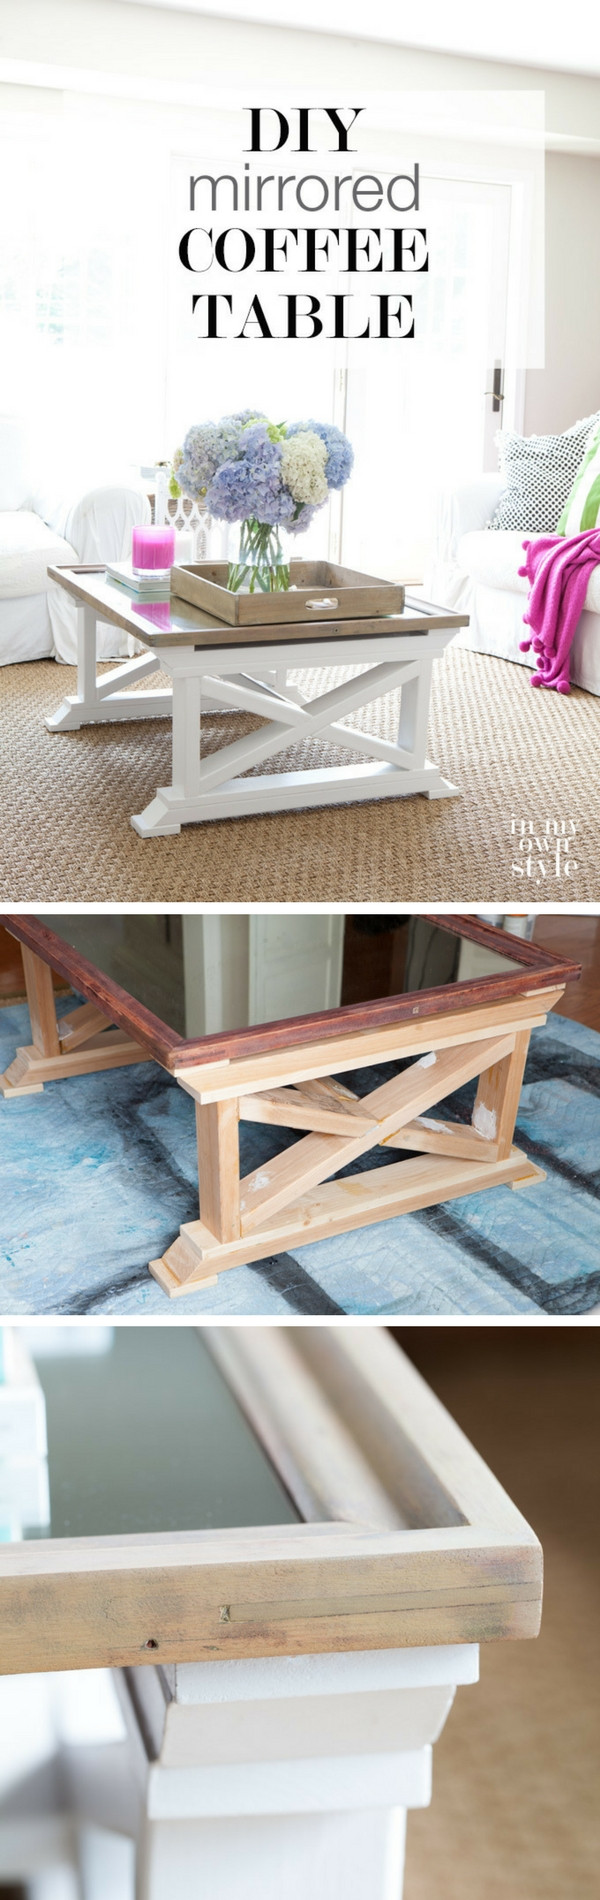 Diy Living Room Tables
 20 Easy DIY 2x4 Wood Projects You Can Make Even from Scrap